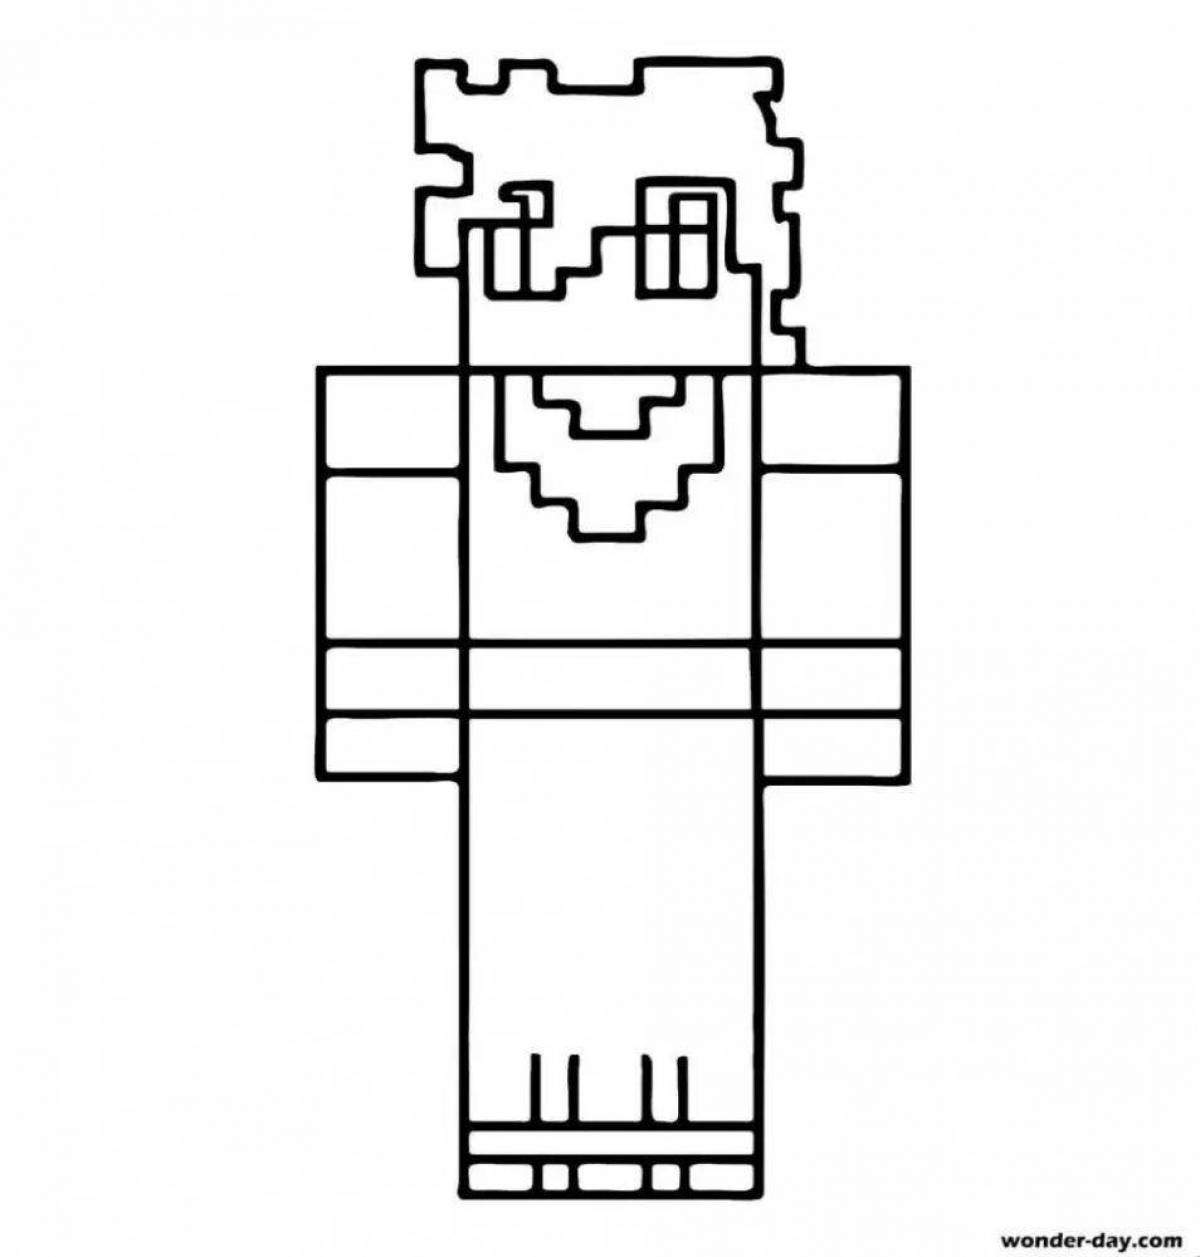 Fun coloring page for minecraft skins